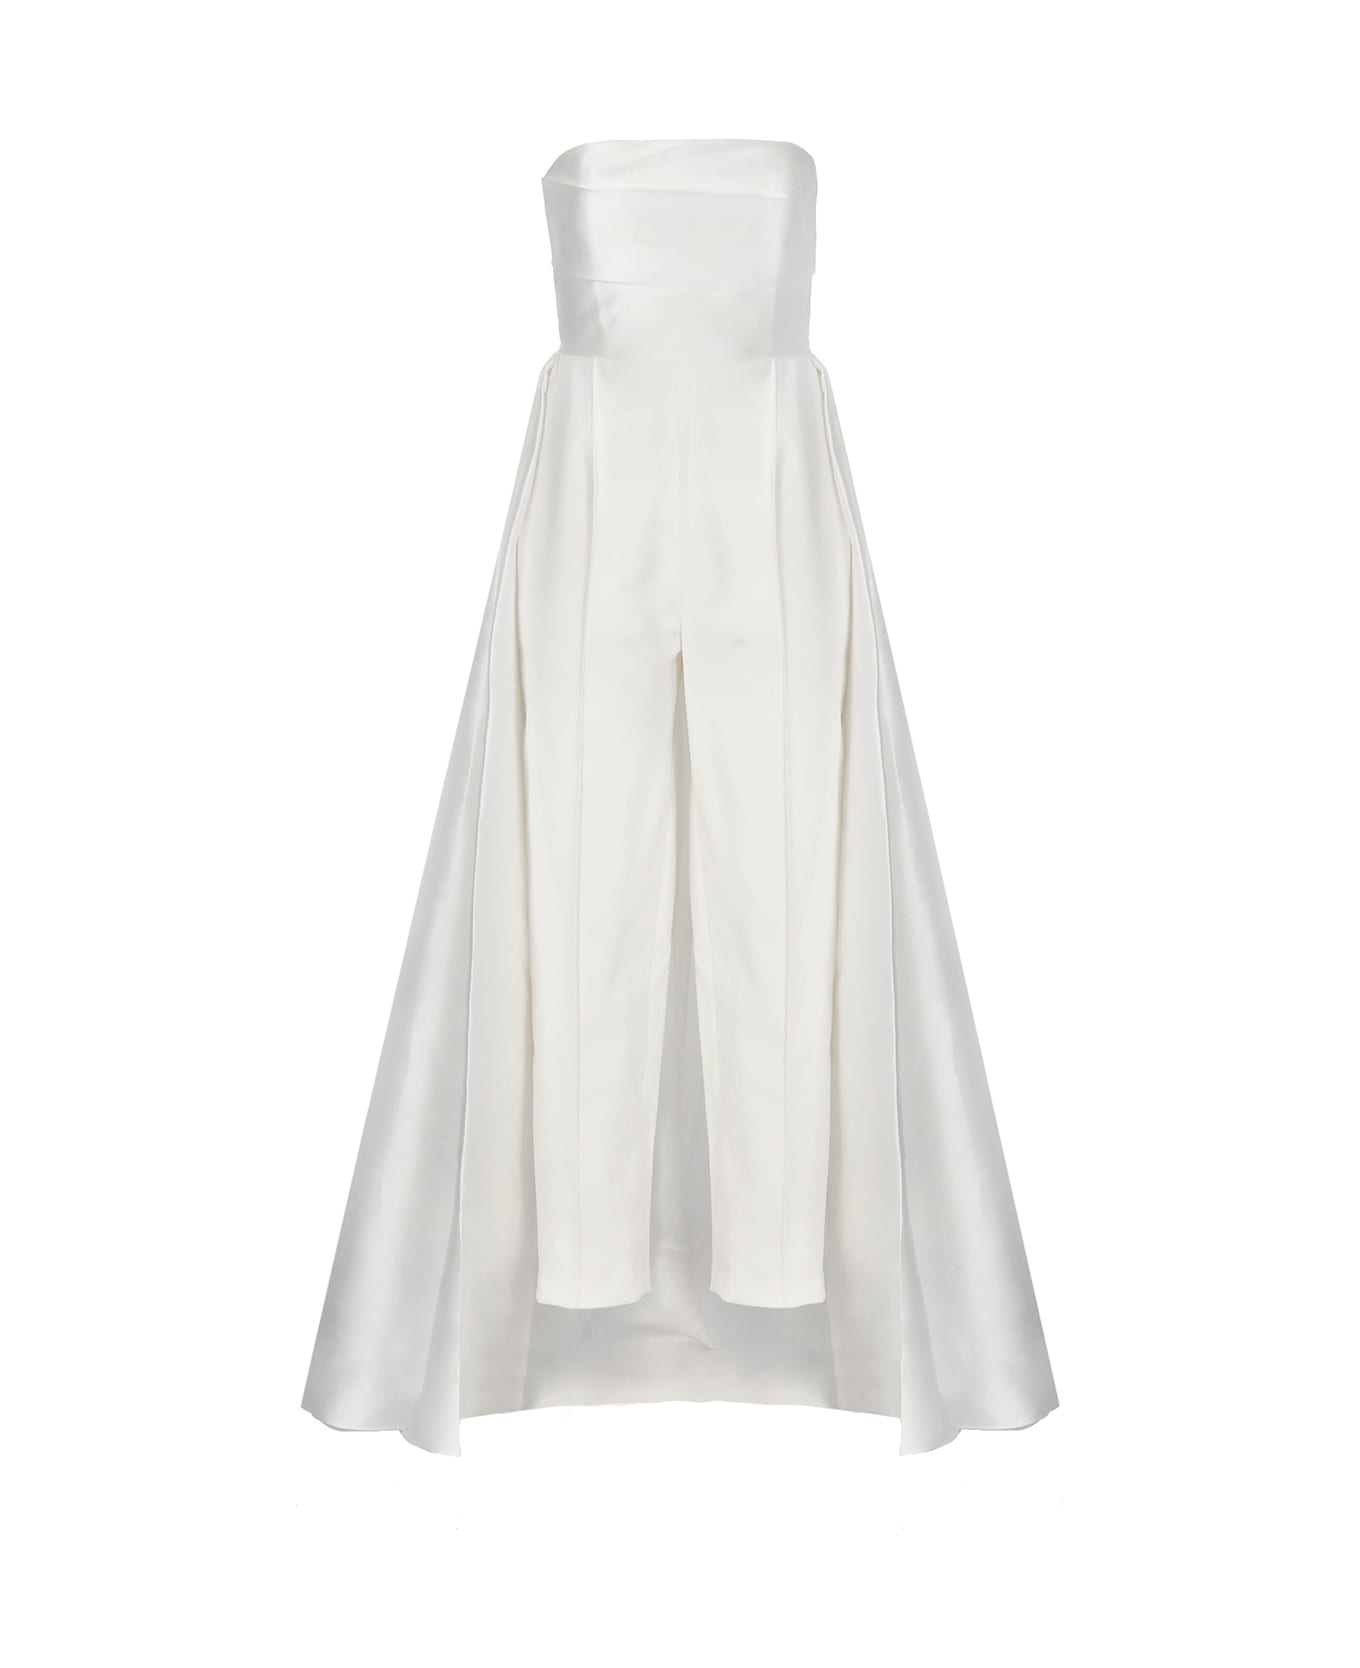 Solace London Astra Jumpsuit - White ジャンプスーツ